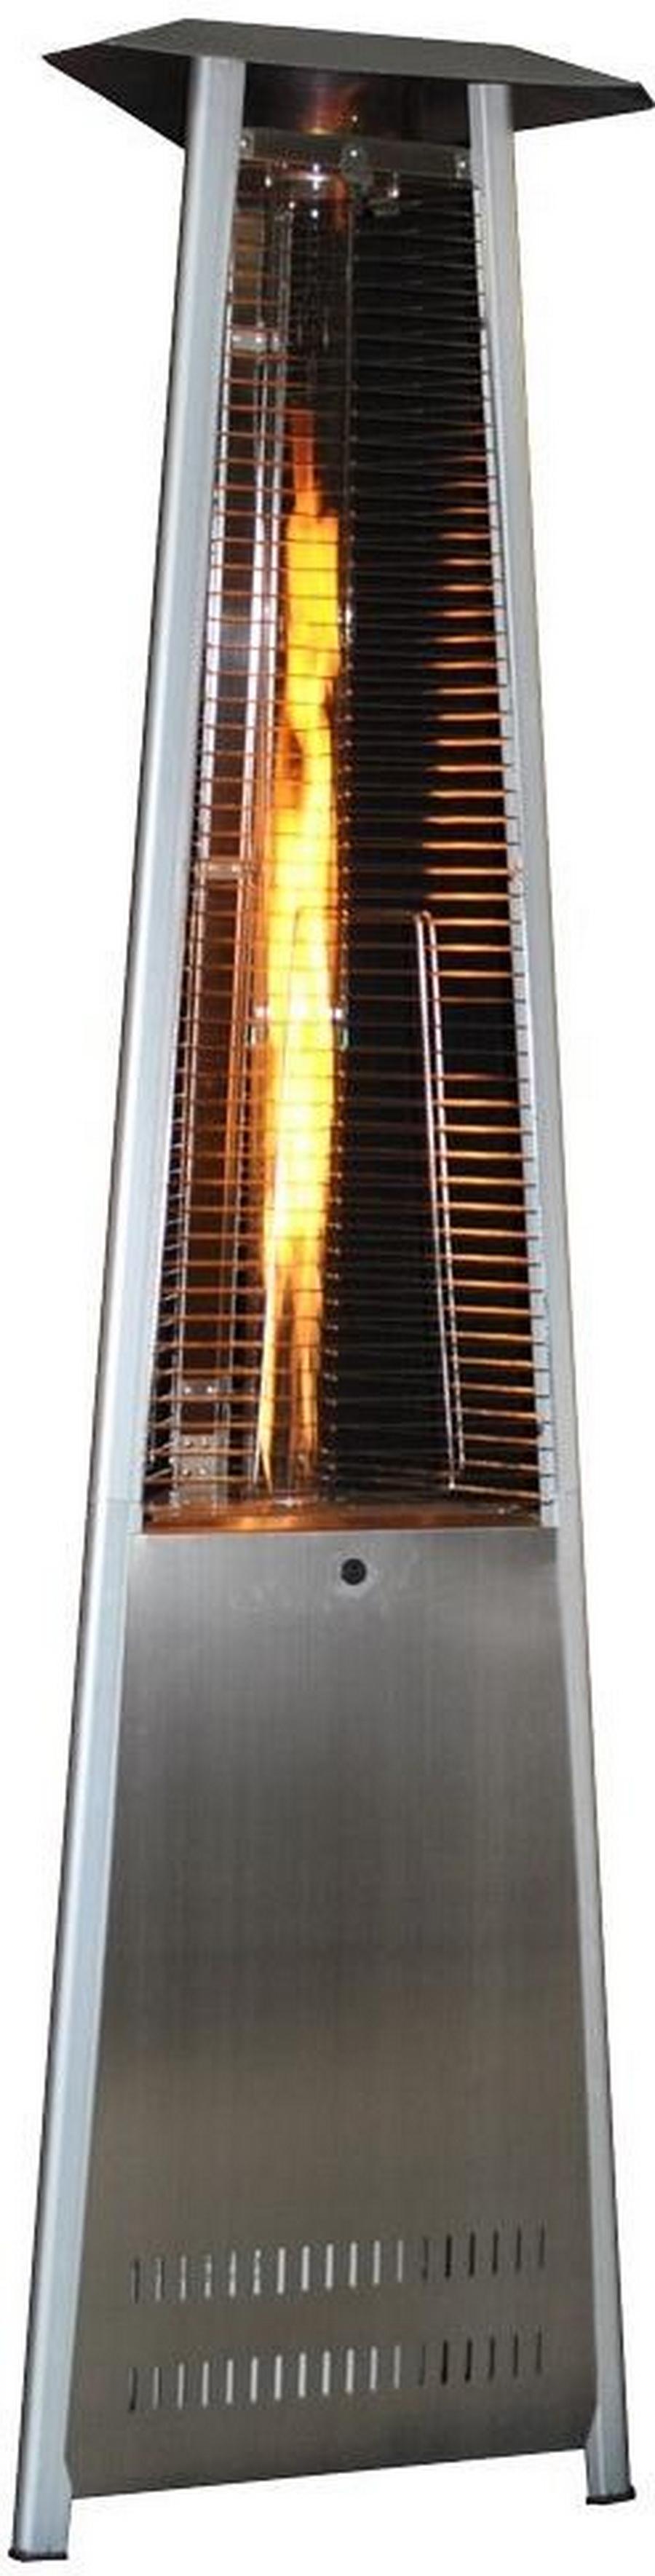 Sunheat Triangle Variable Flame Stainless Steel Patio Heater PHSQSS